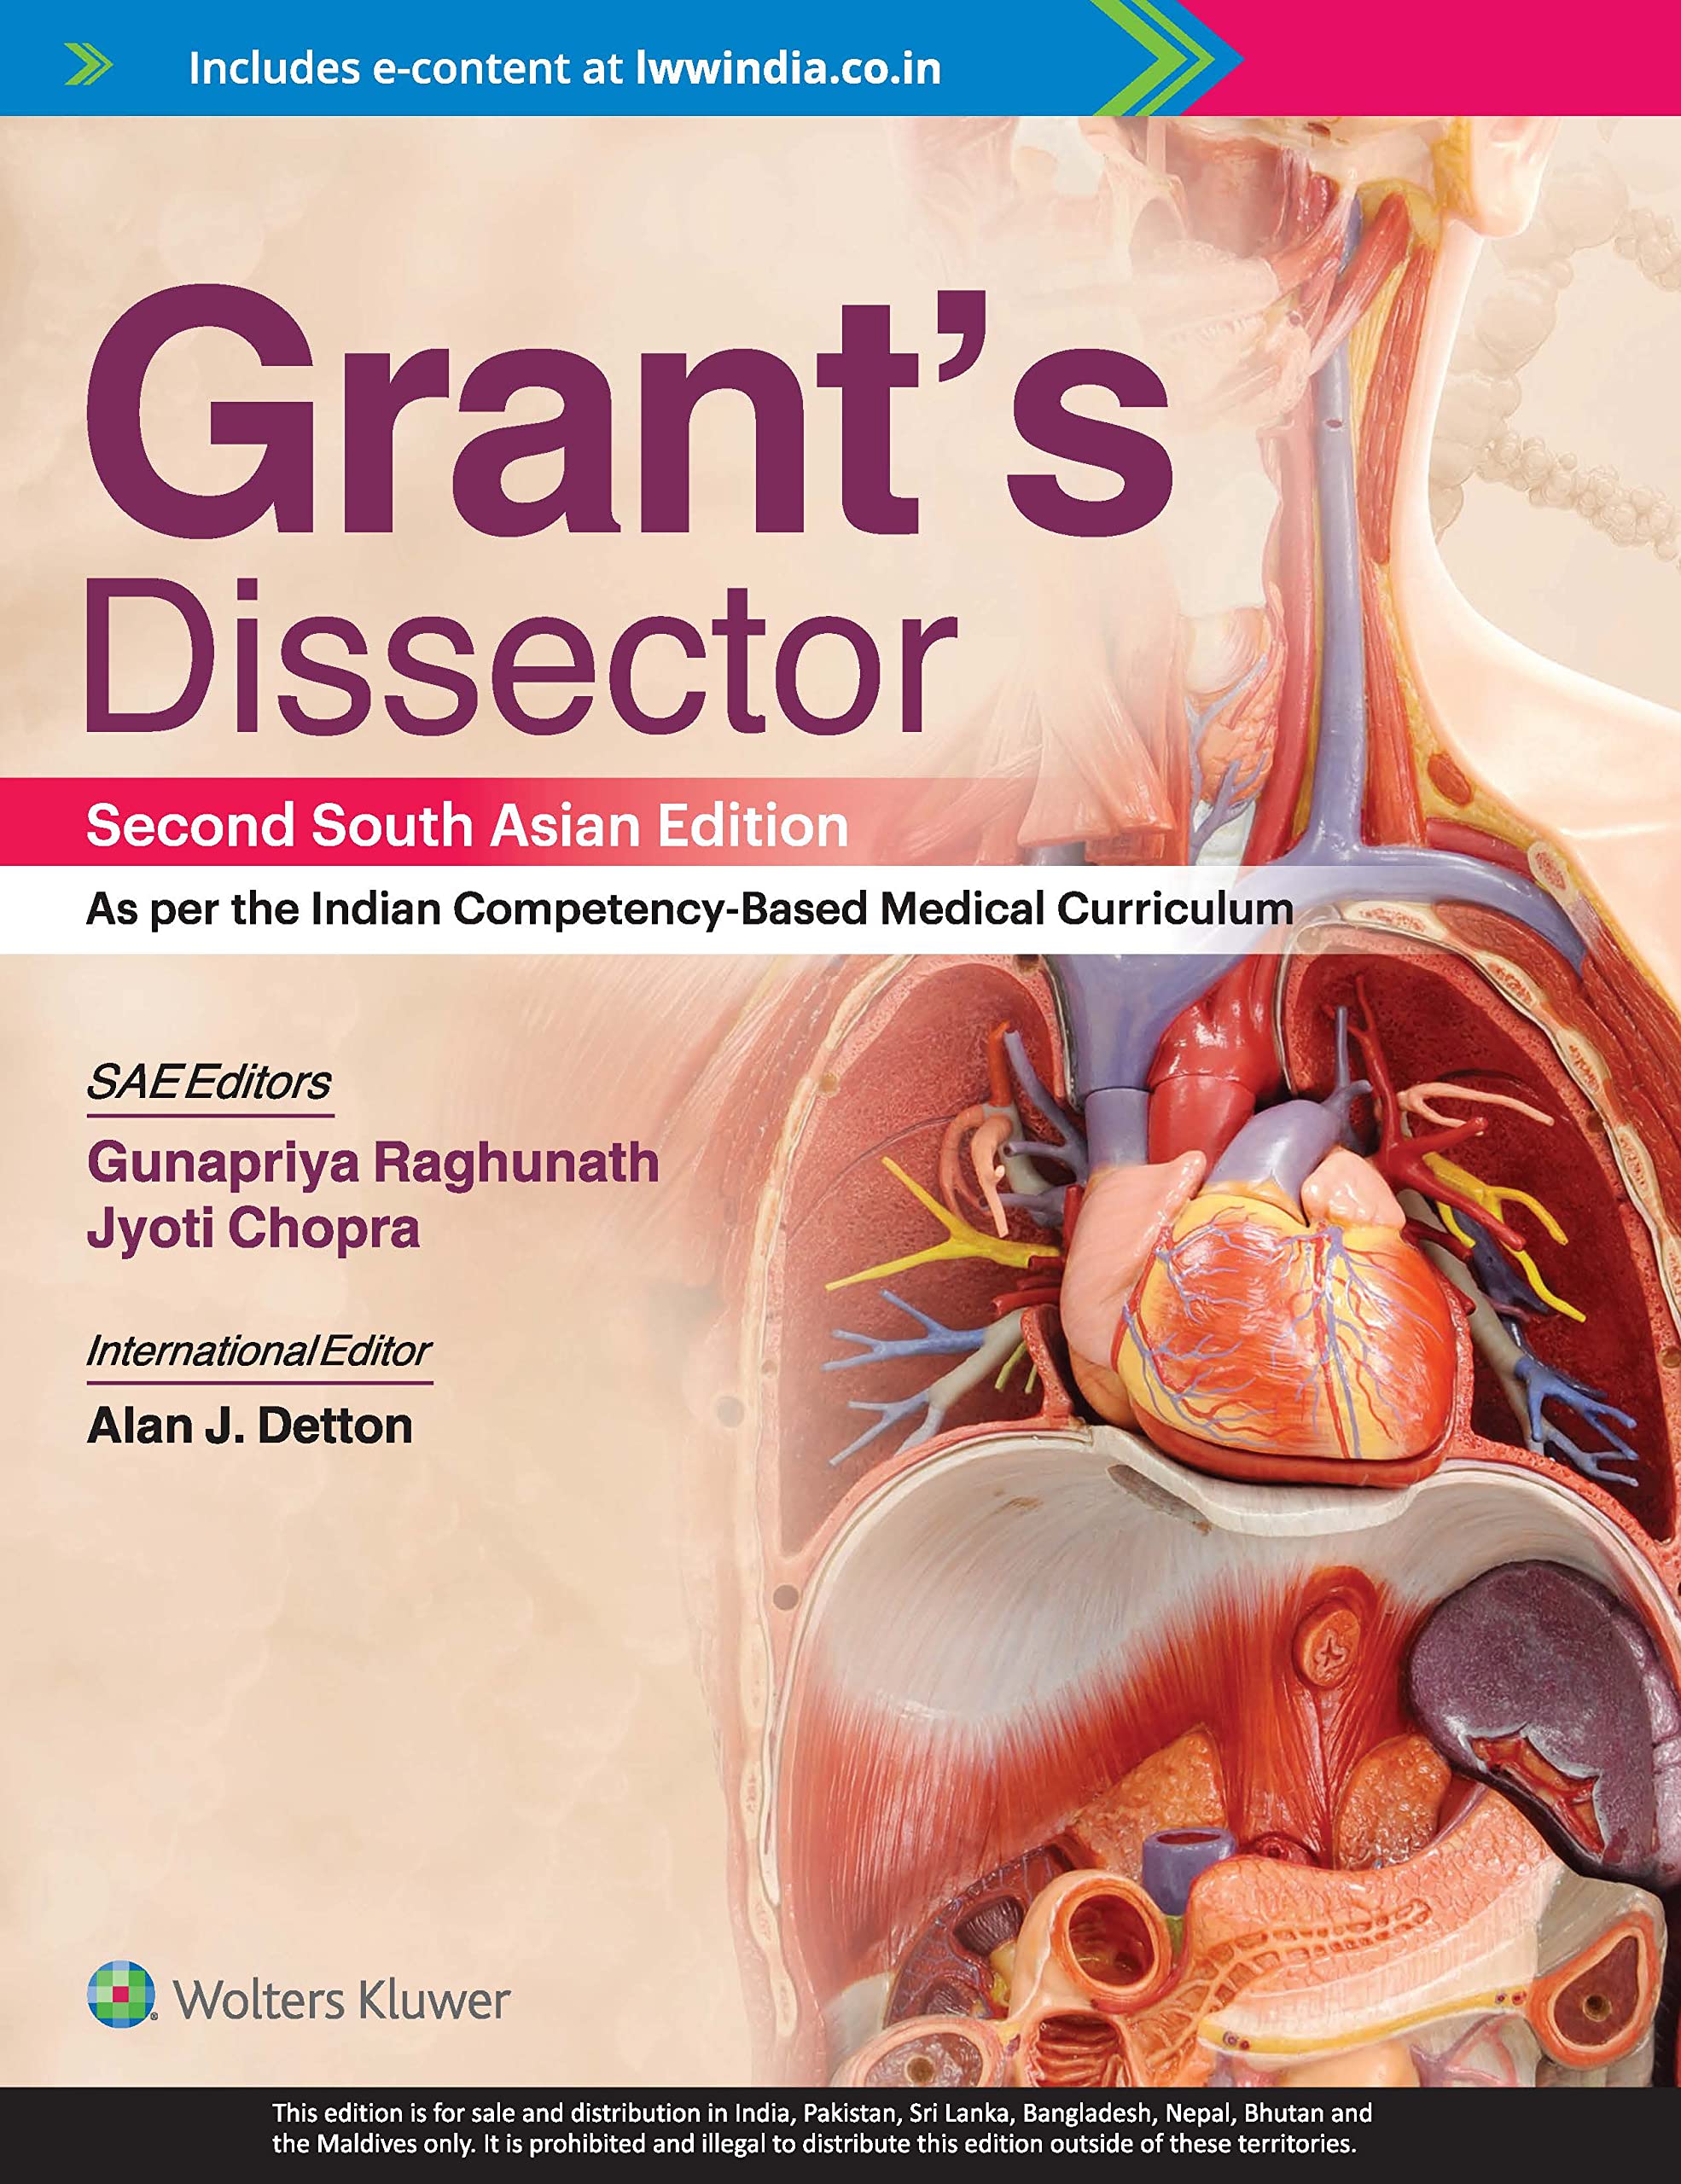 Grants Dissector 2nd South Asian Edition 2022 